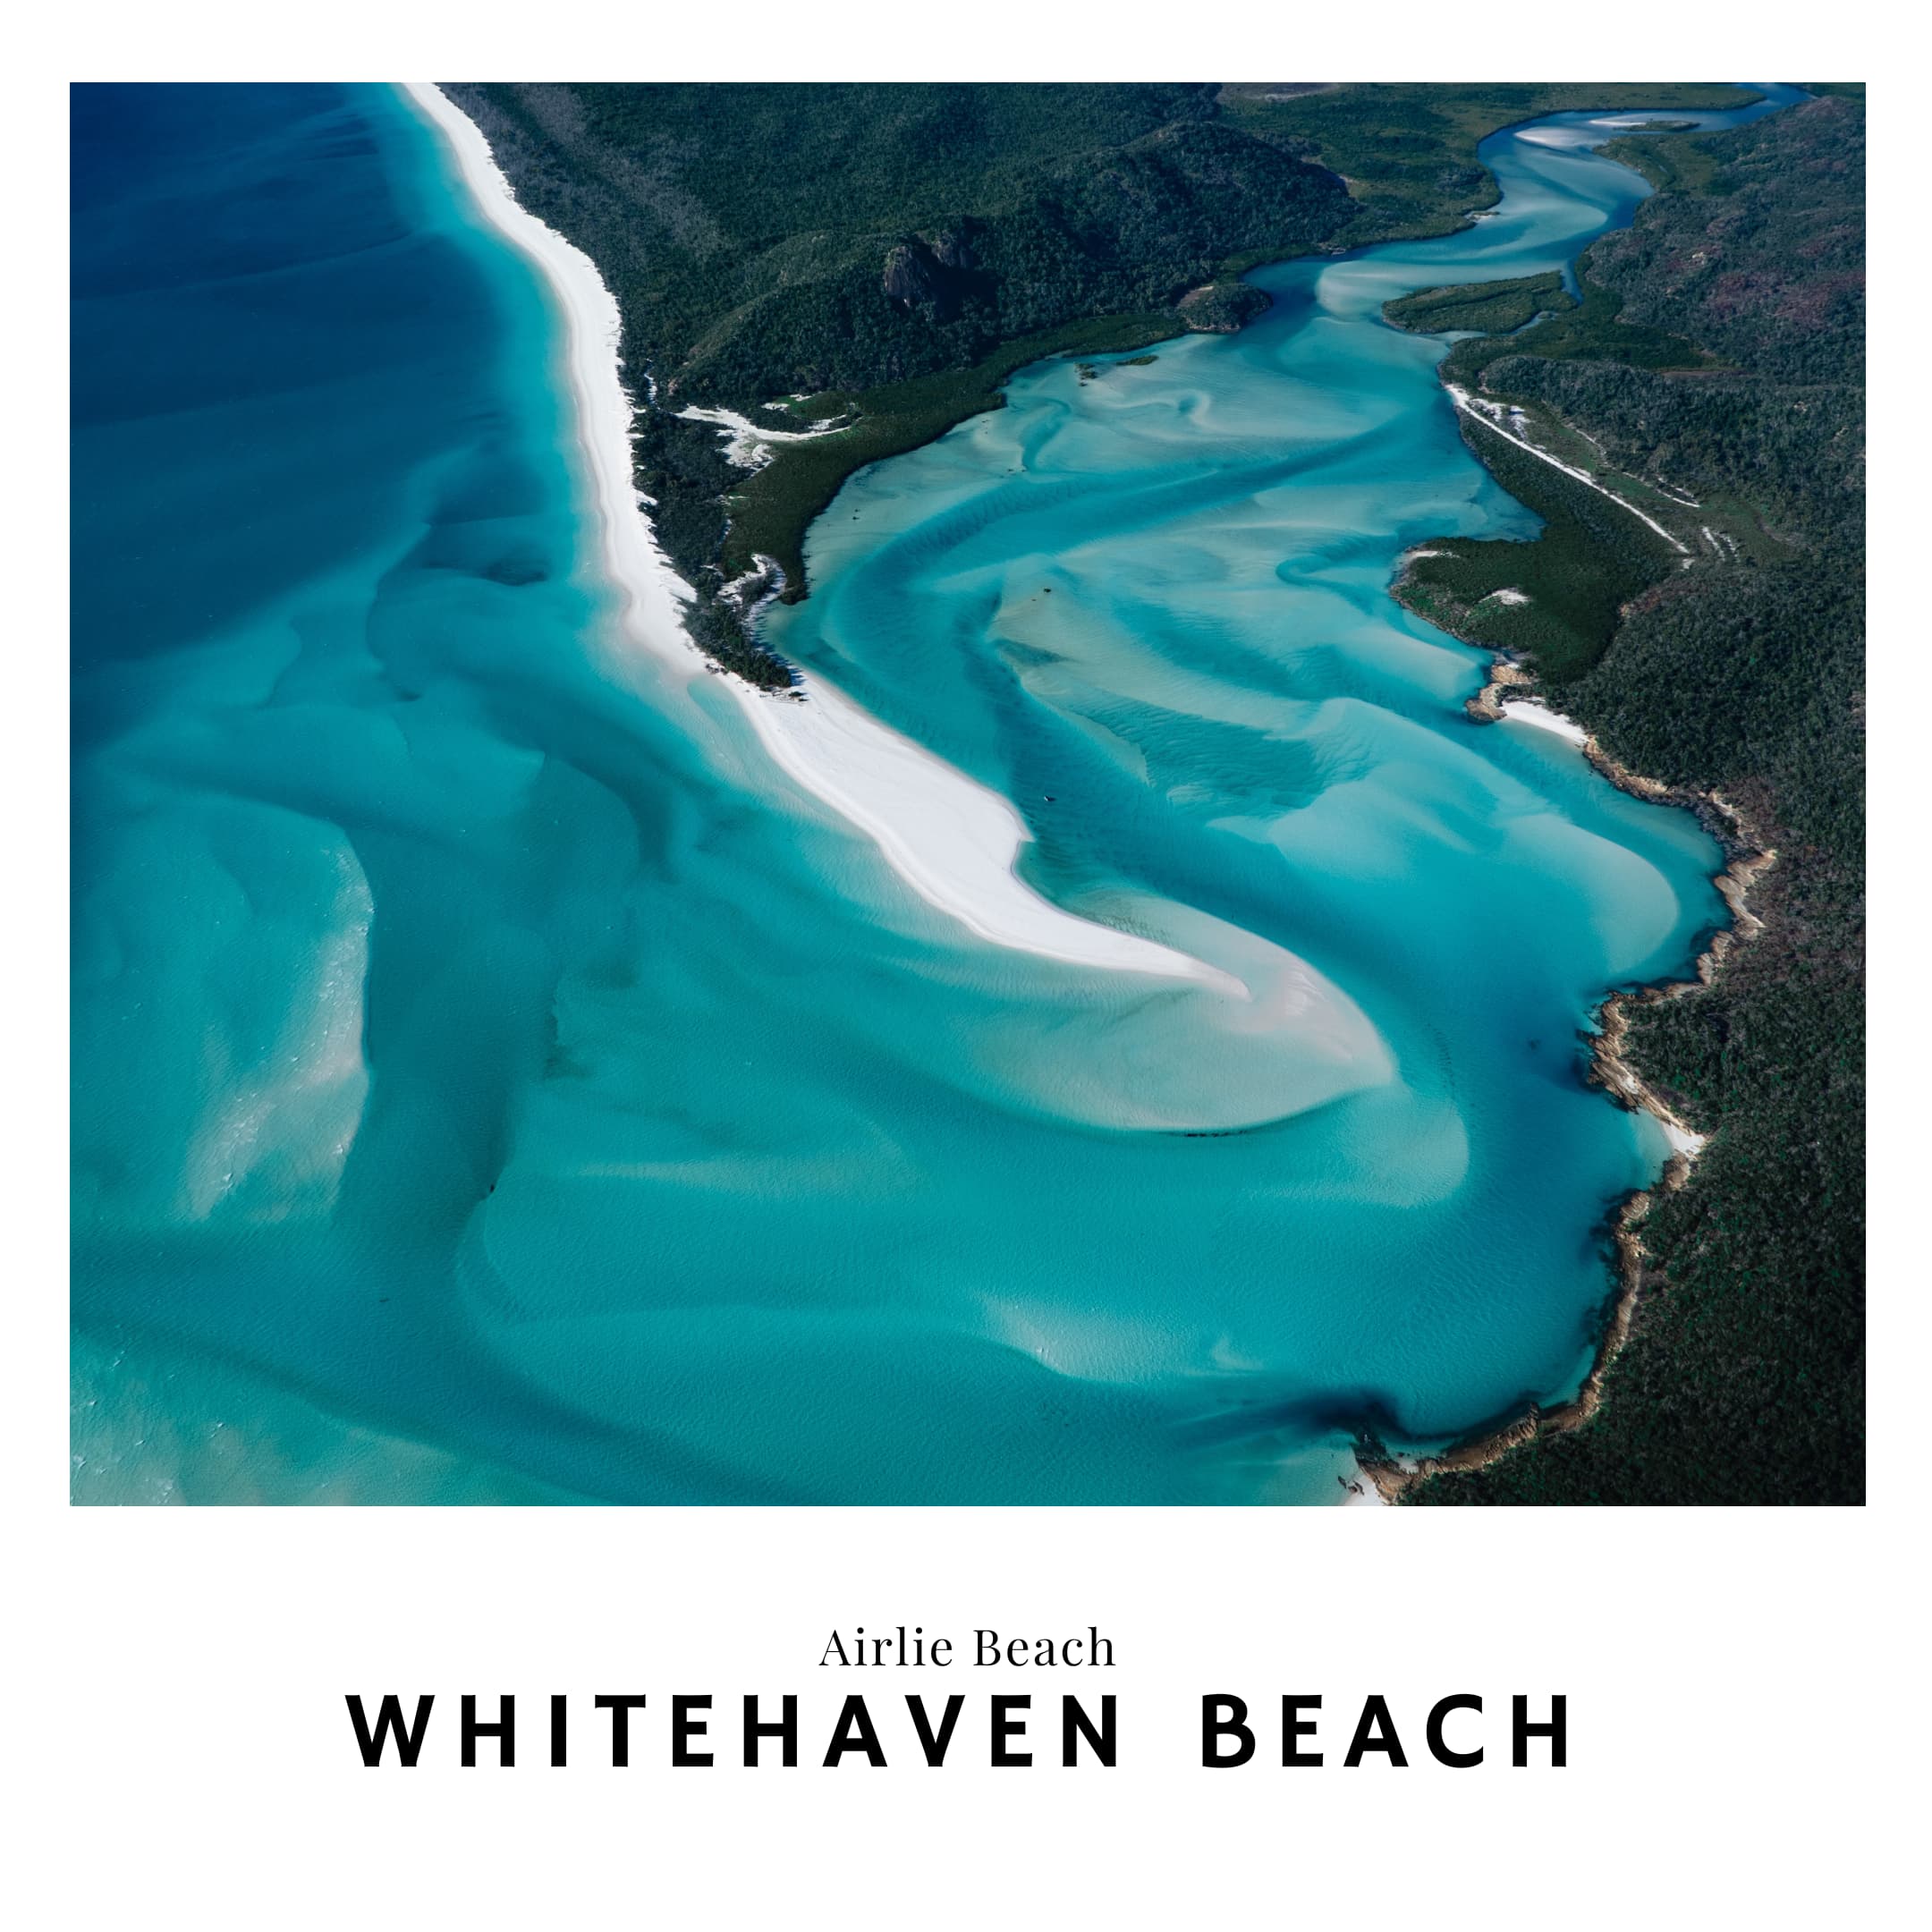 Link to the Whitehaven Beach Travel Guide